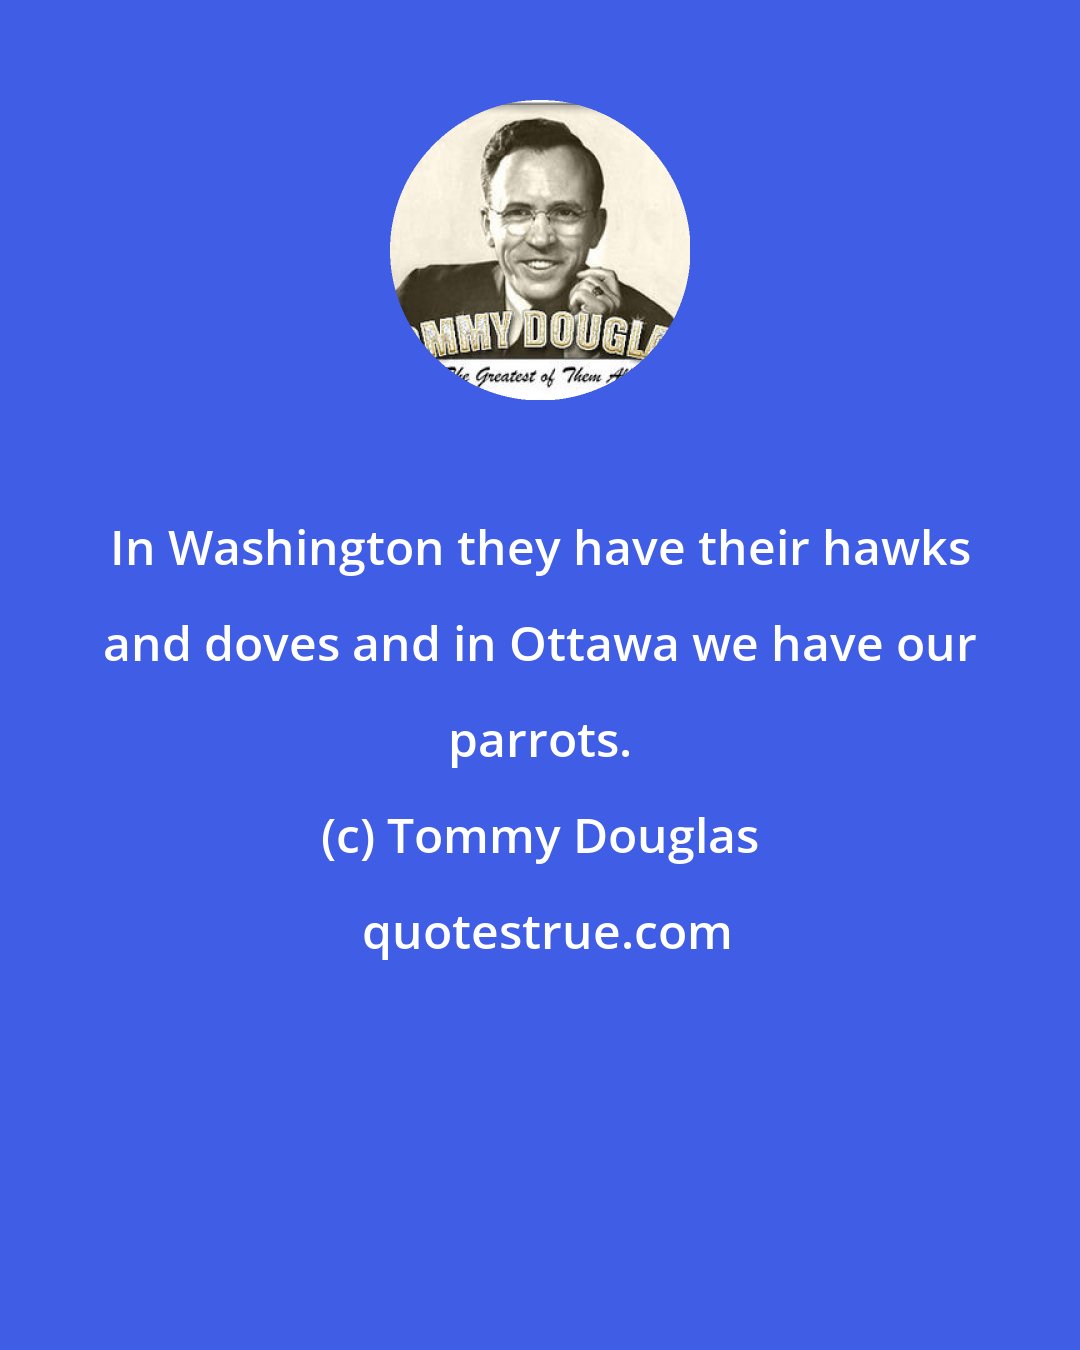 Tommy Douglas: In Washington they have their hawks and doves and in Ottawa we have our parrots.